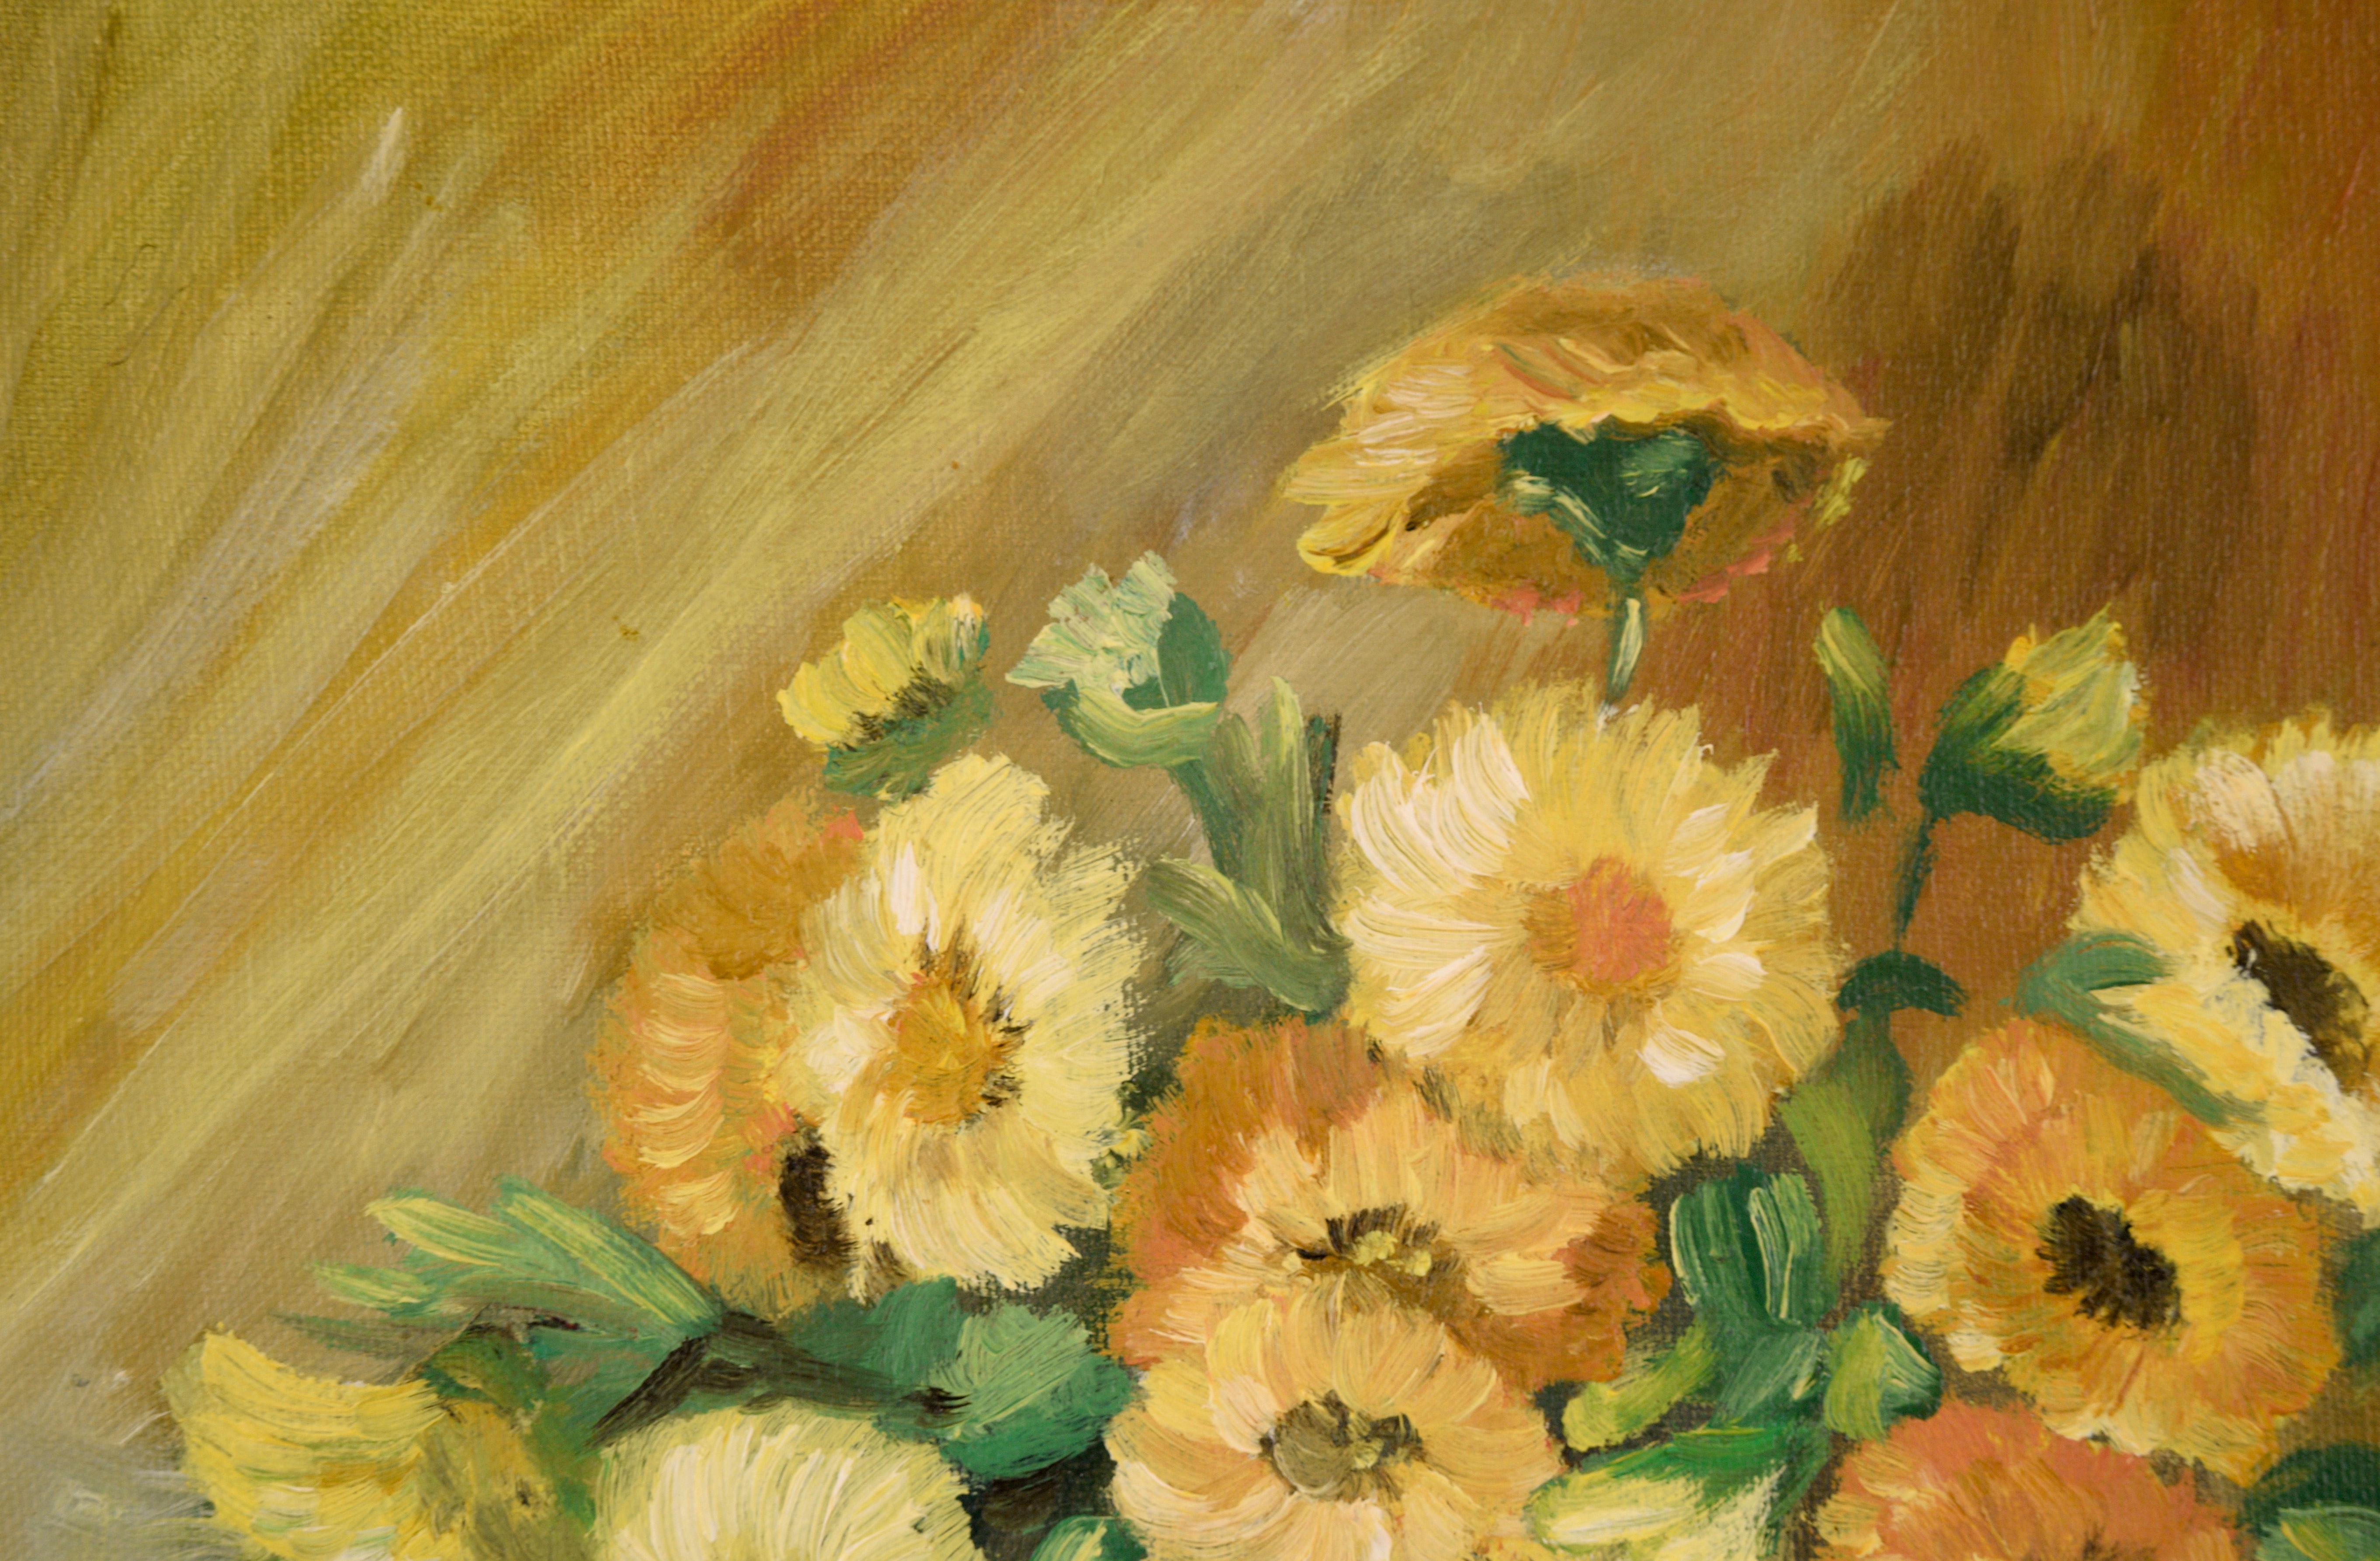 Calendula Still Life with Pitcher in Oil on Canvas - American Impressionist Painting by Unknown